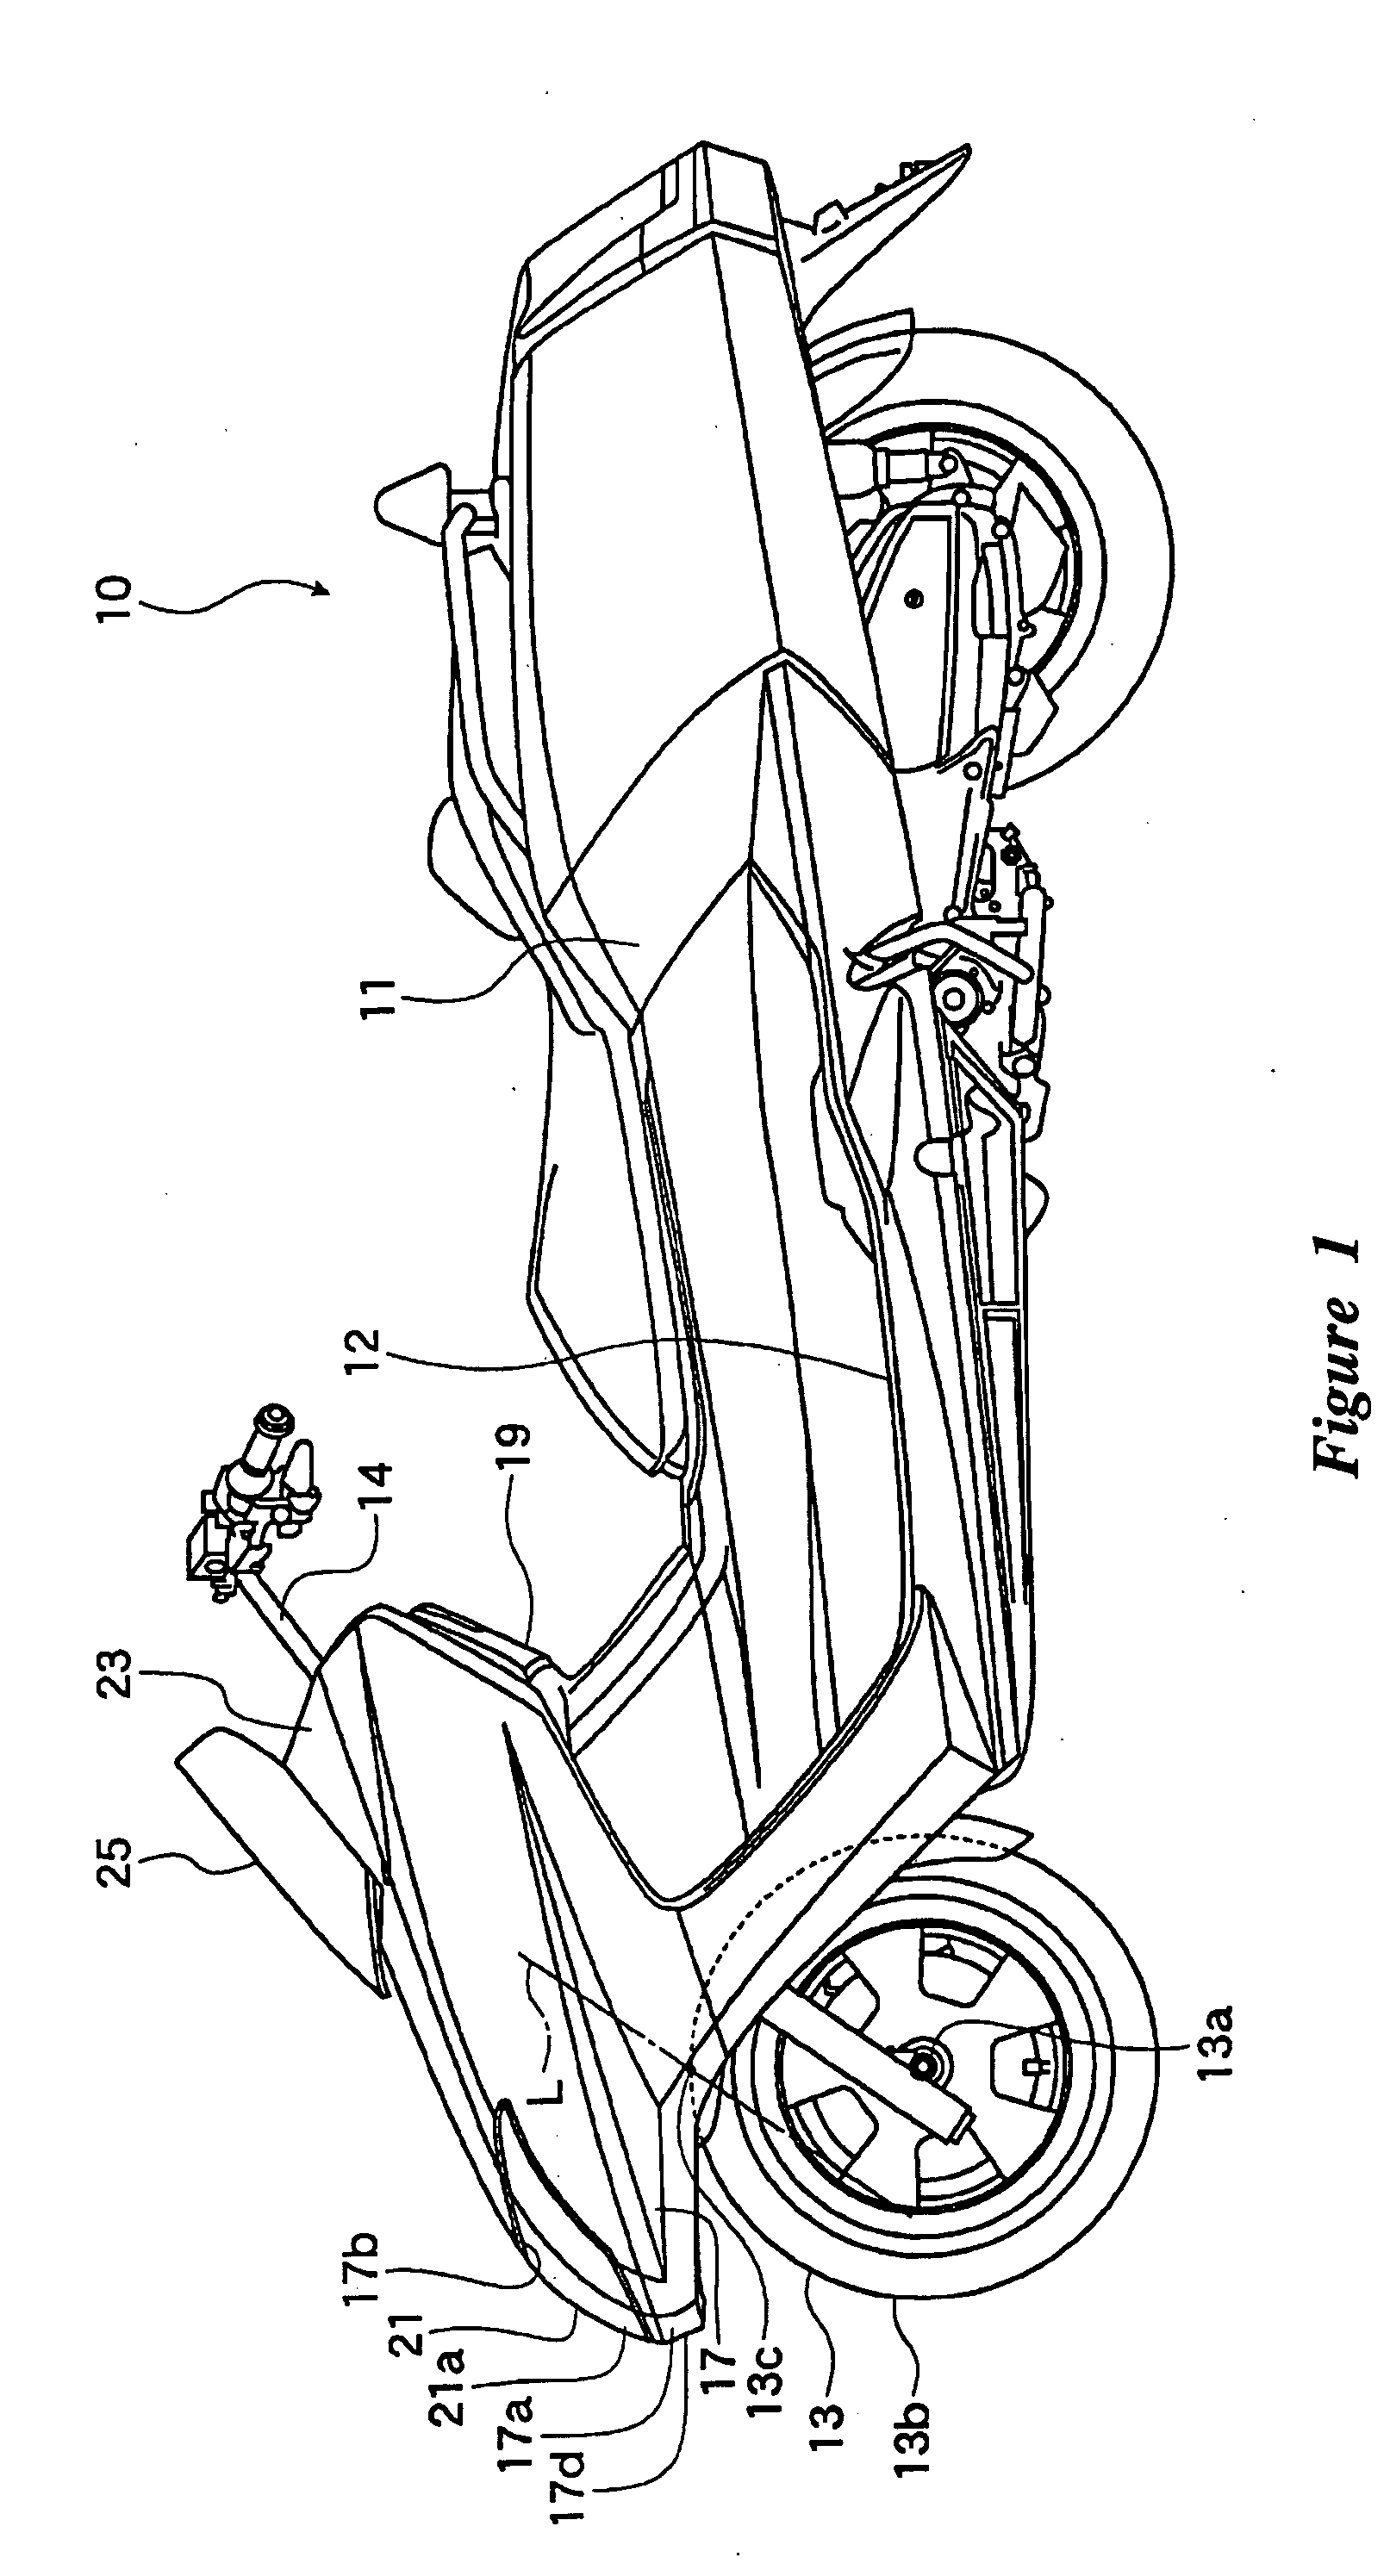 Headlight assembly for a straddle-type vehicle